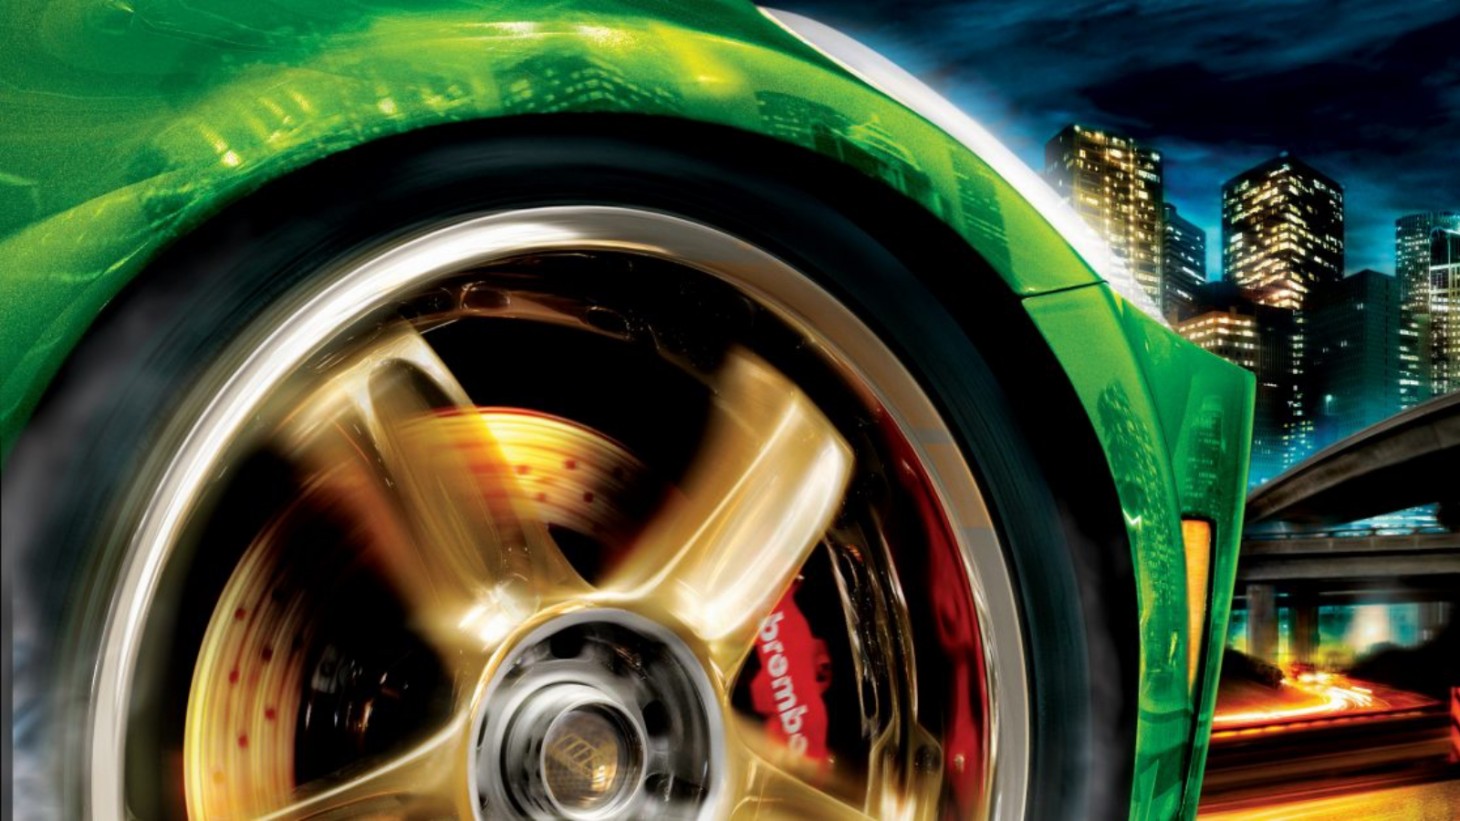 A Codemasters Studio Has Merged With Criterion To Develop New Need For Speed